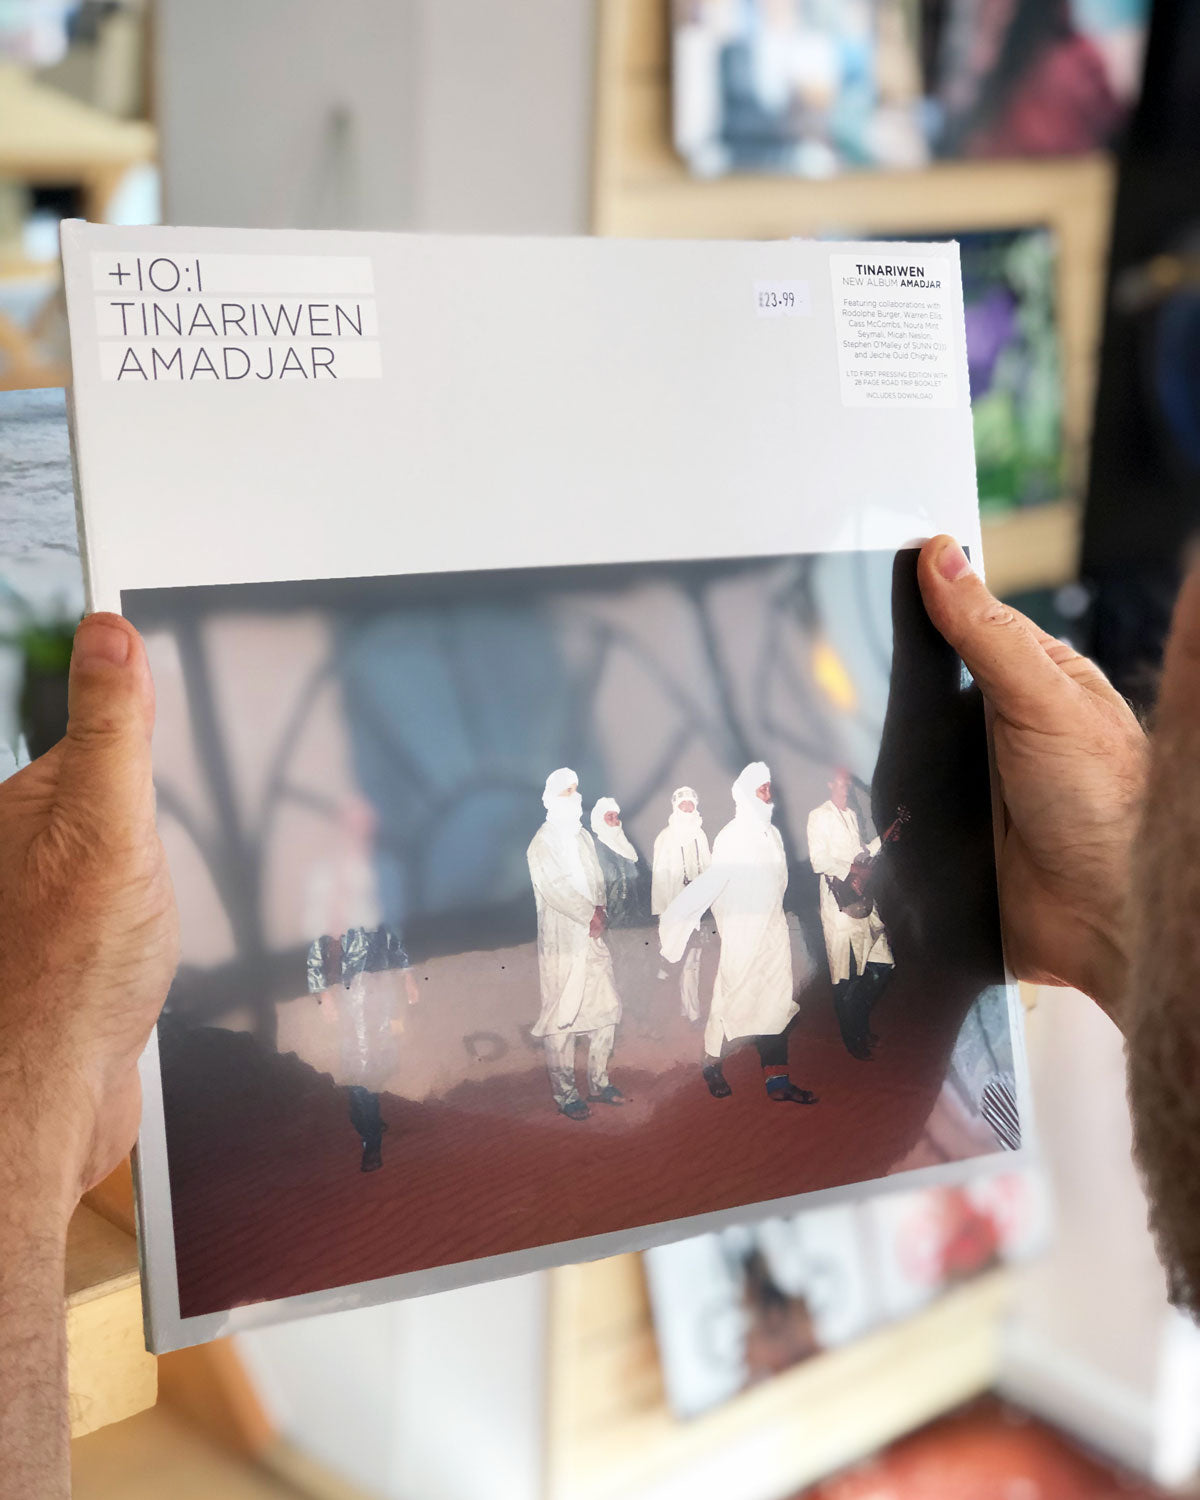 ROTW: Tinariwen, Bat For Lashes, Kindness, Frankie Cosmos and Iggy Pop.